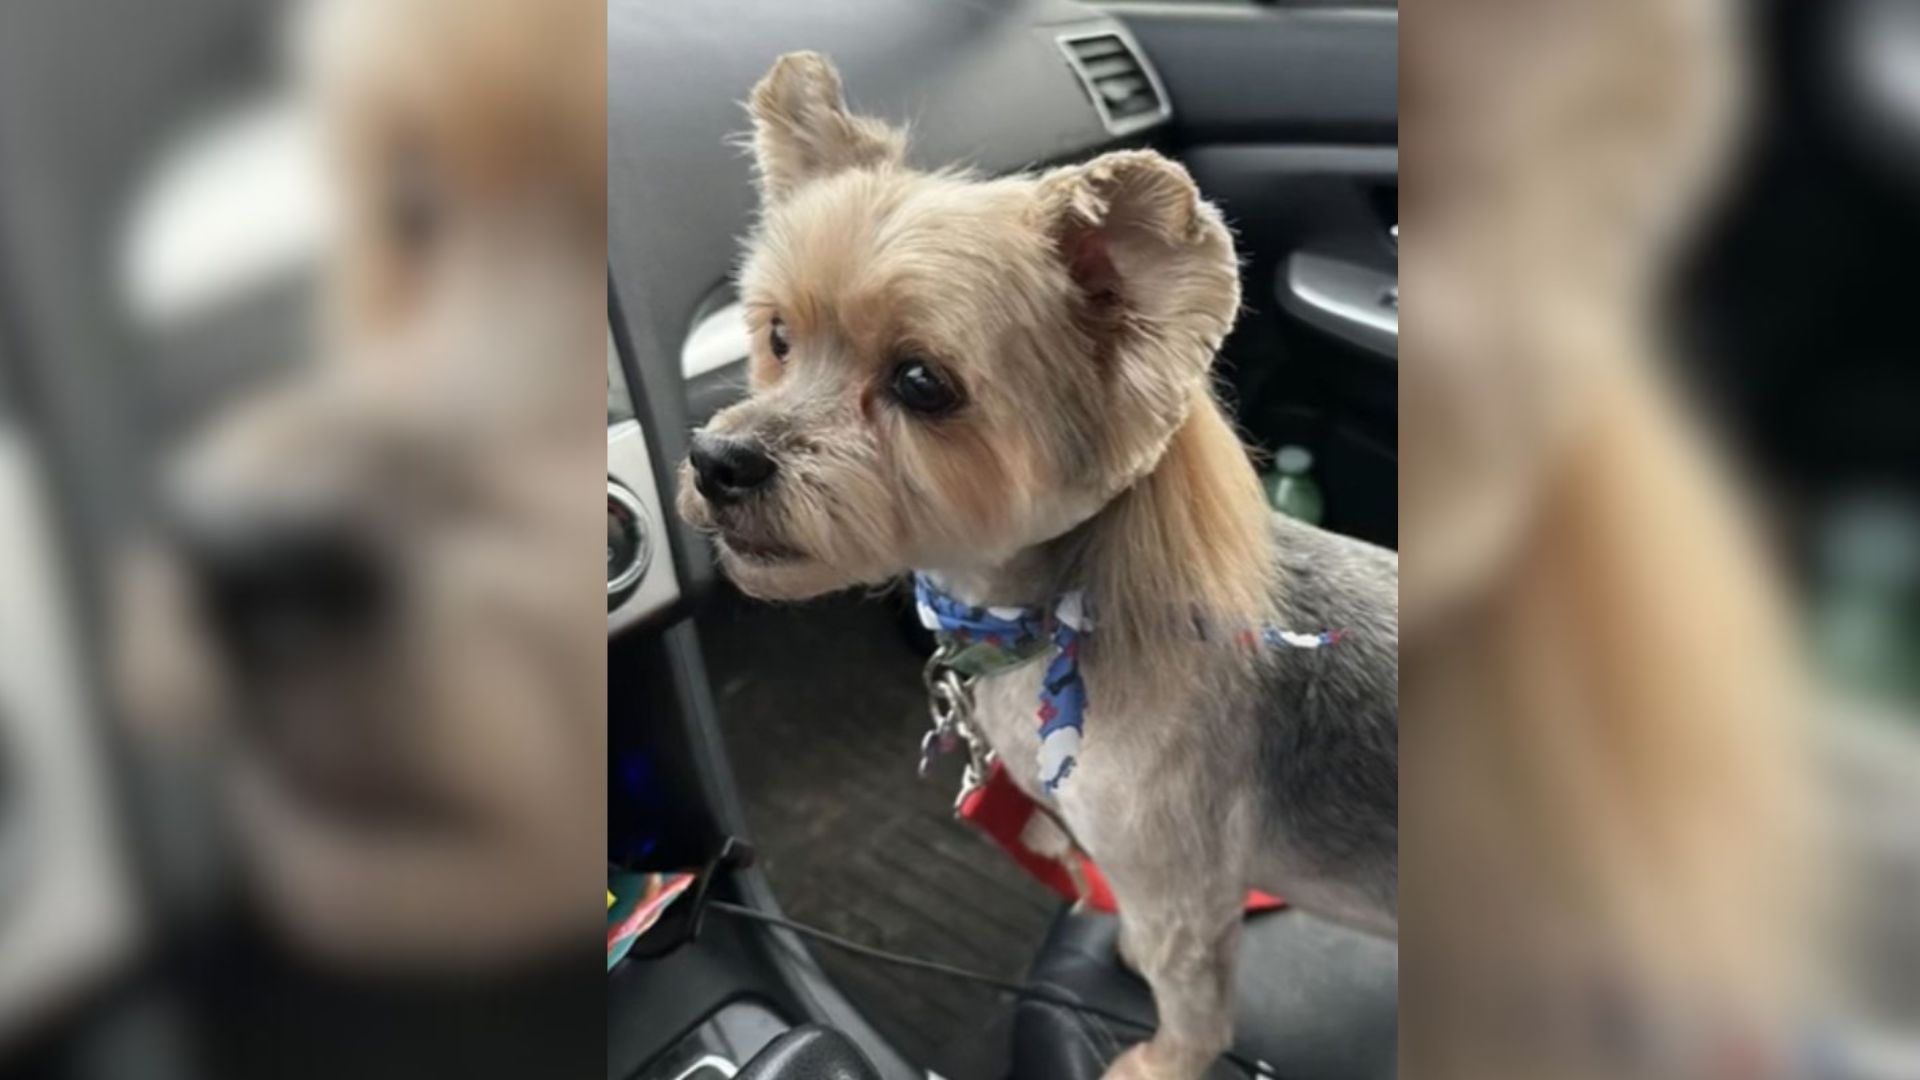 Owner Was Surprised When He Saw His Pup’s Haircut After He Picked Him Up From A Groomer